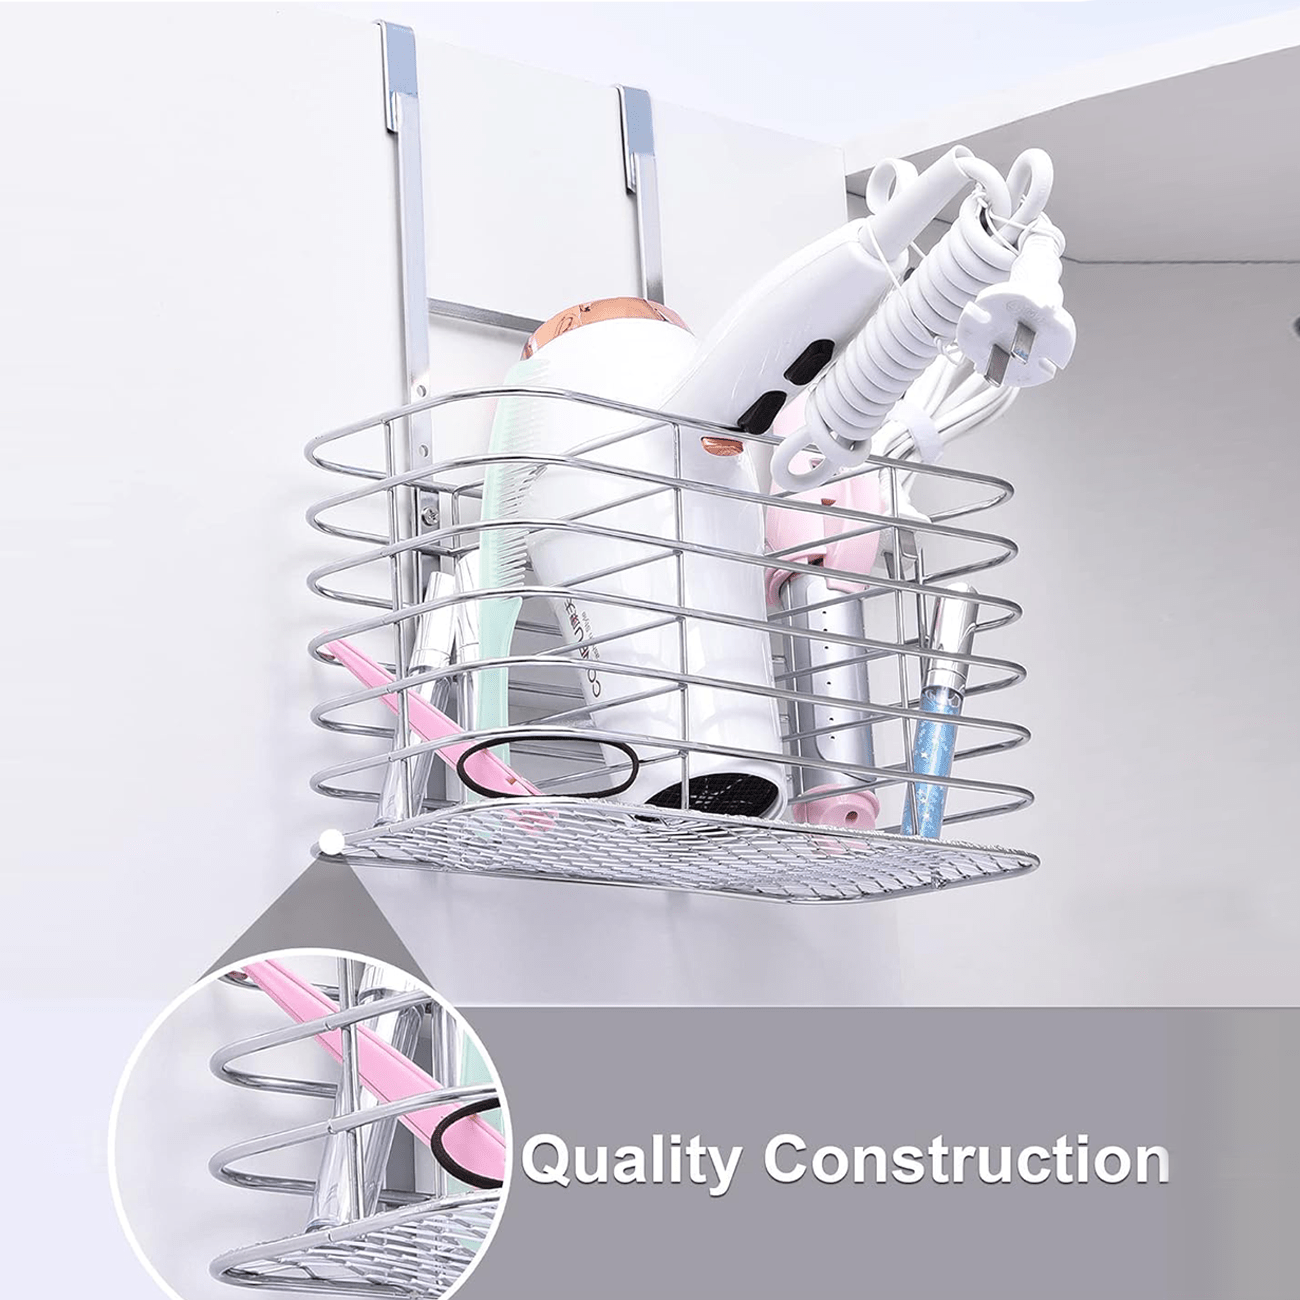 

Hair Tool Organizer Blow Dryer Holder Hair Dryer Holder Cabinet Door, Bathroom Organizer Hair Care And Styling Tools Storage Basket For Hair Dryer, Curling Irons, Hair Straighteners